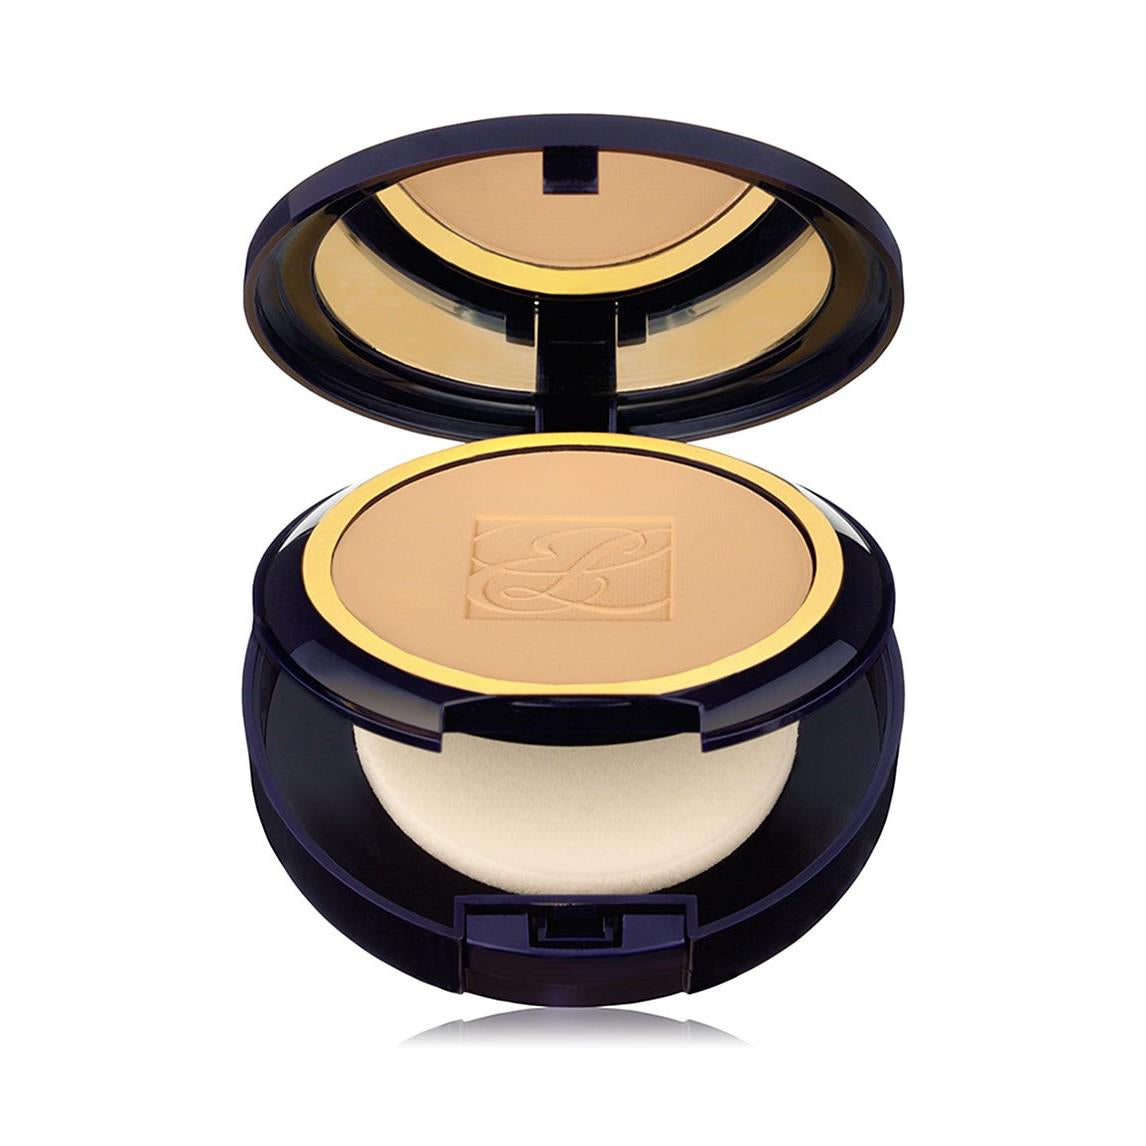 Estee Lauder/Double Wear Stay-In-Place Powder Makeup 4N2 Spiced Sand .42 Oz 0.42 Oz Foundation 0.42 Oz